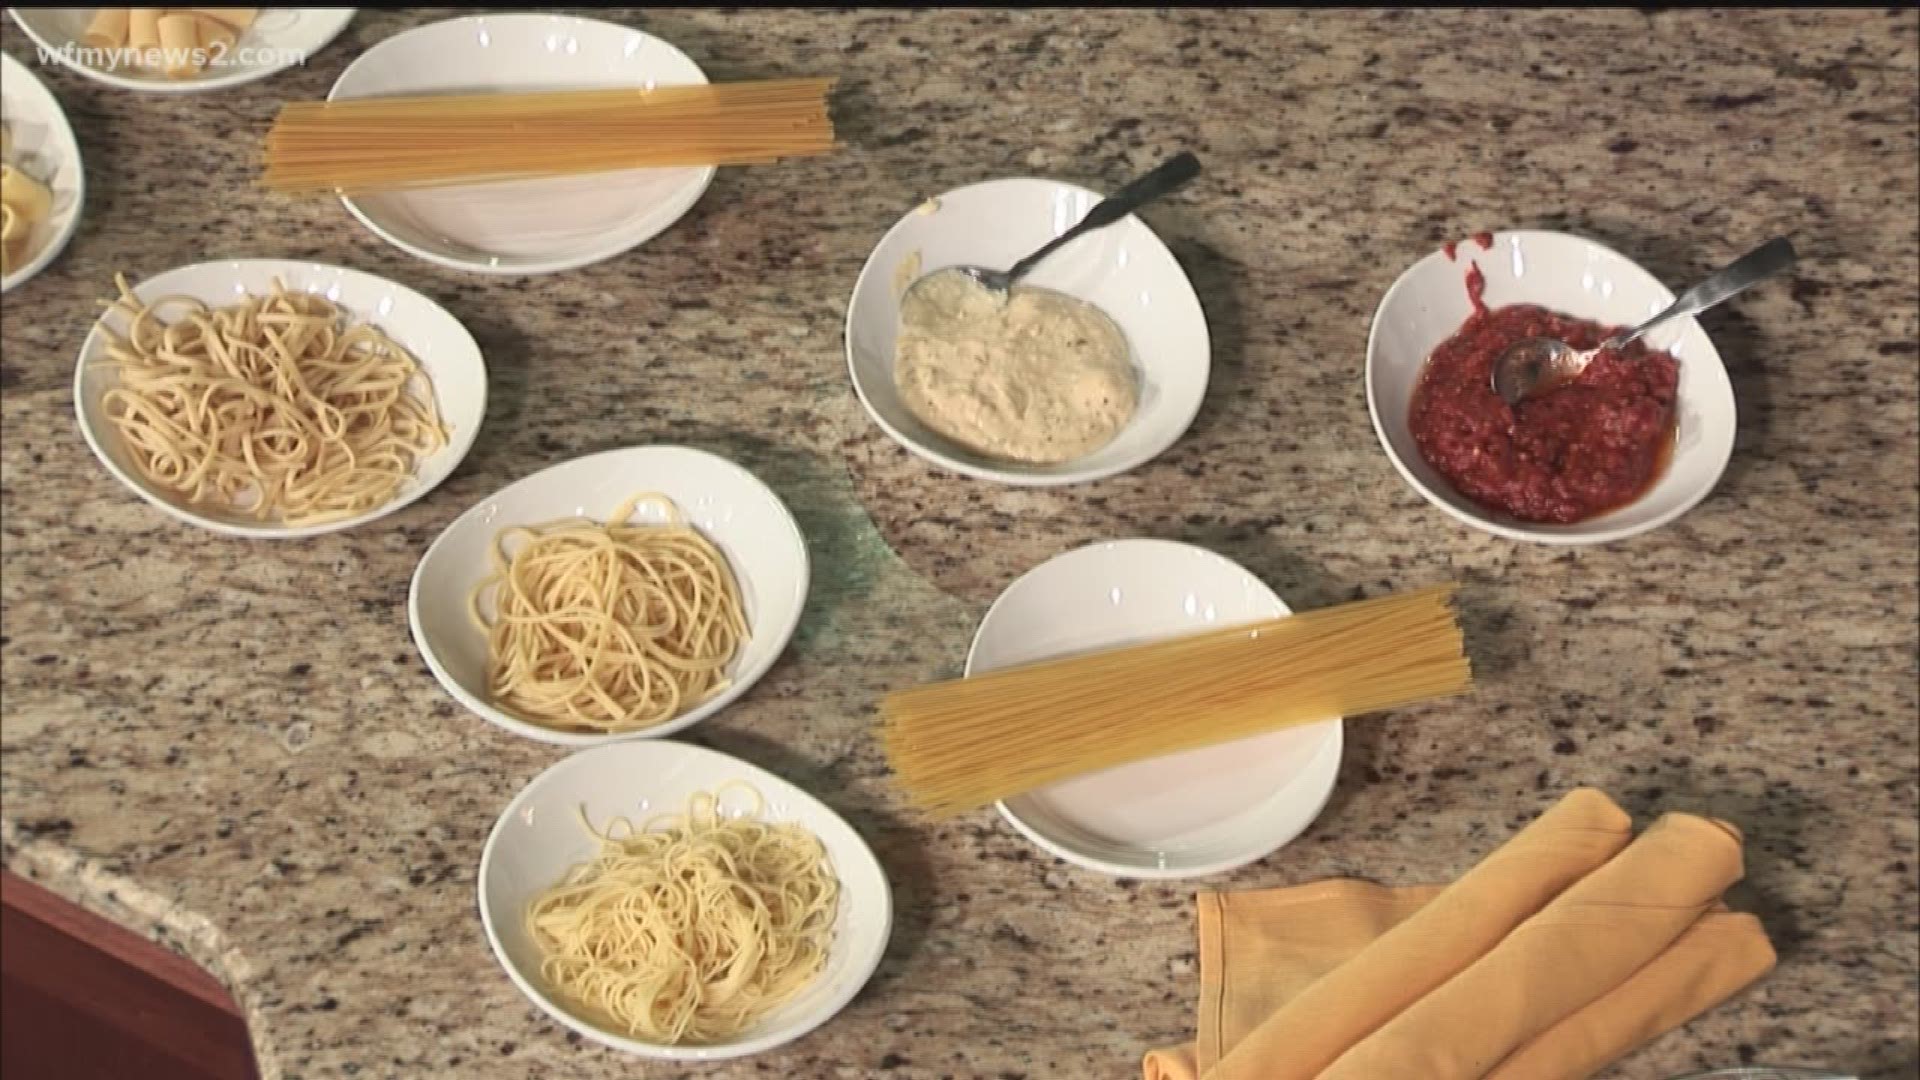 Today we're learning how to make an at-home Pasta Bar filled with your favorite type of noodles, sauces, and toppings.